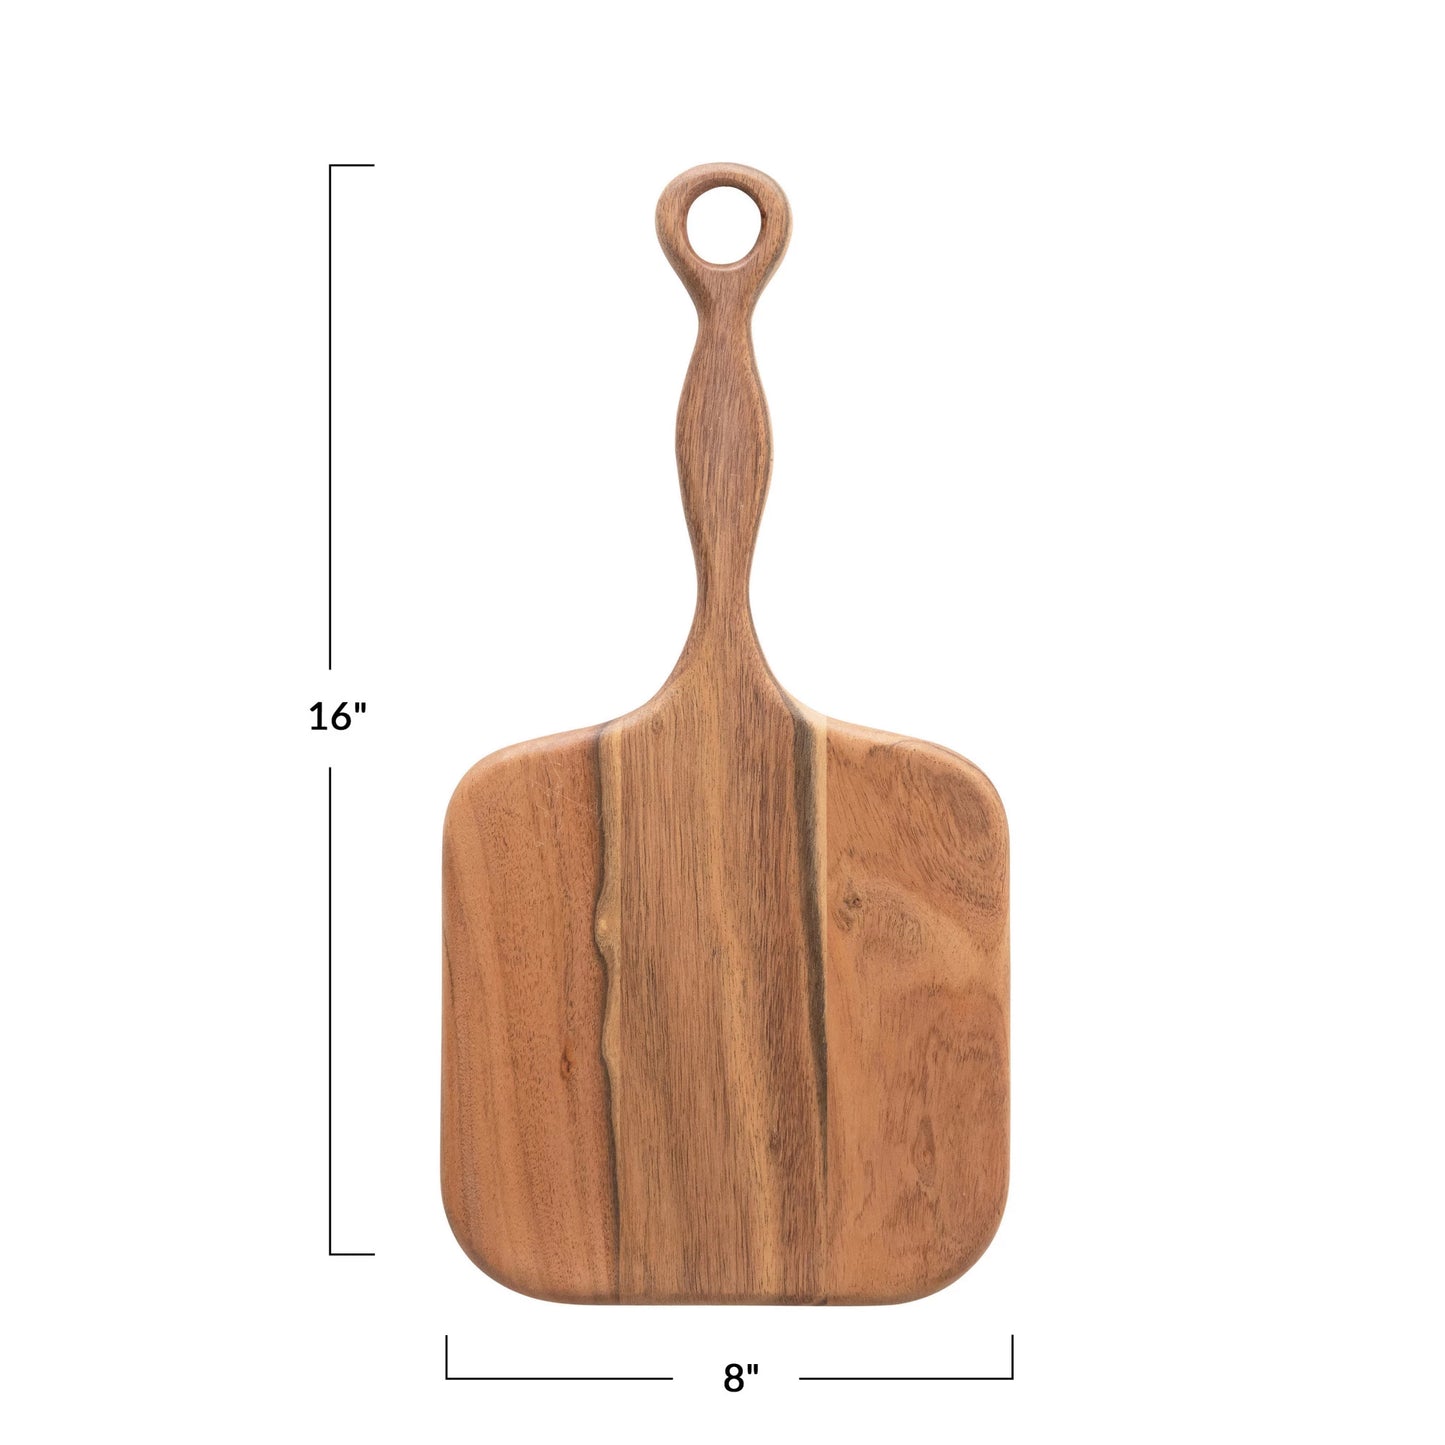 Acacia Wood Cheese / Cutting Board with Handle